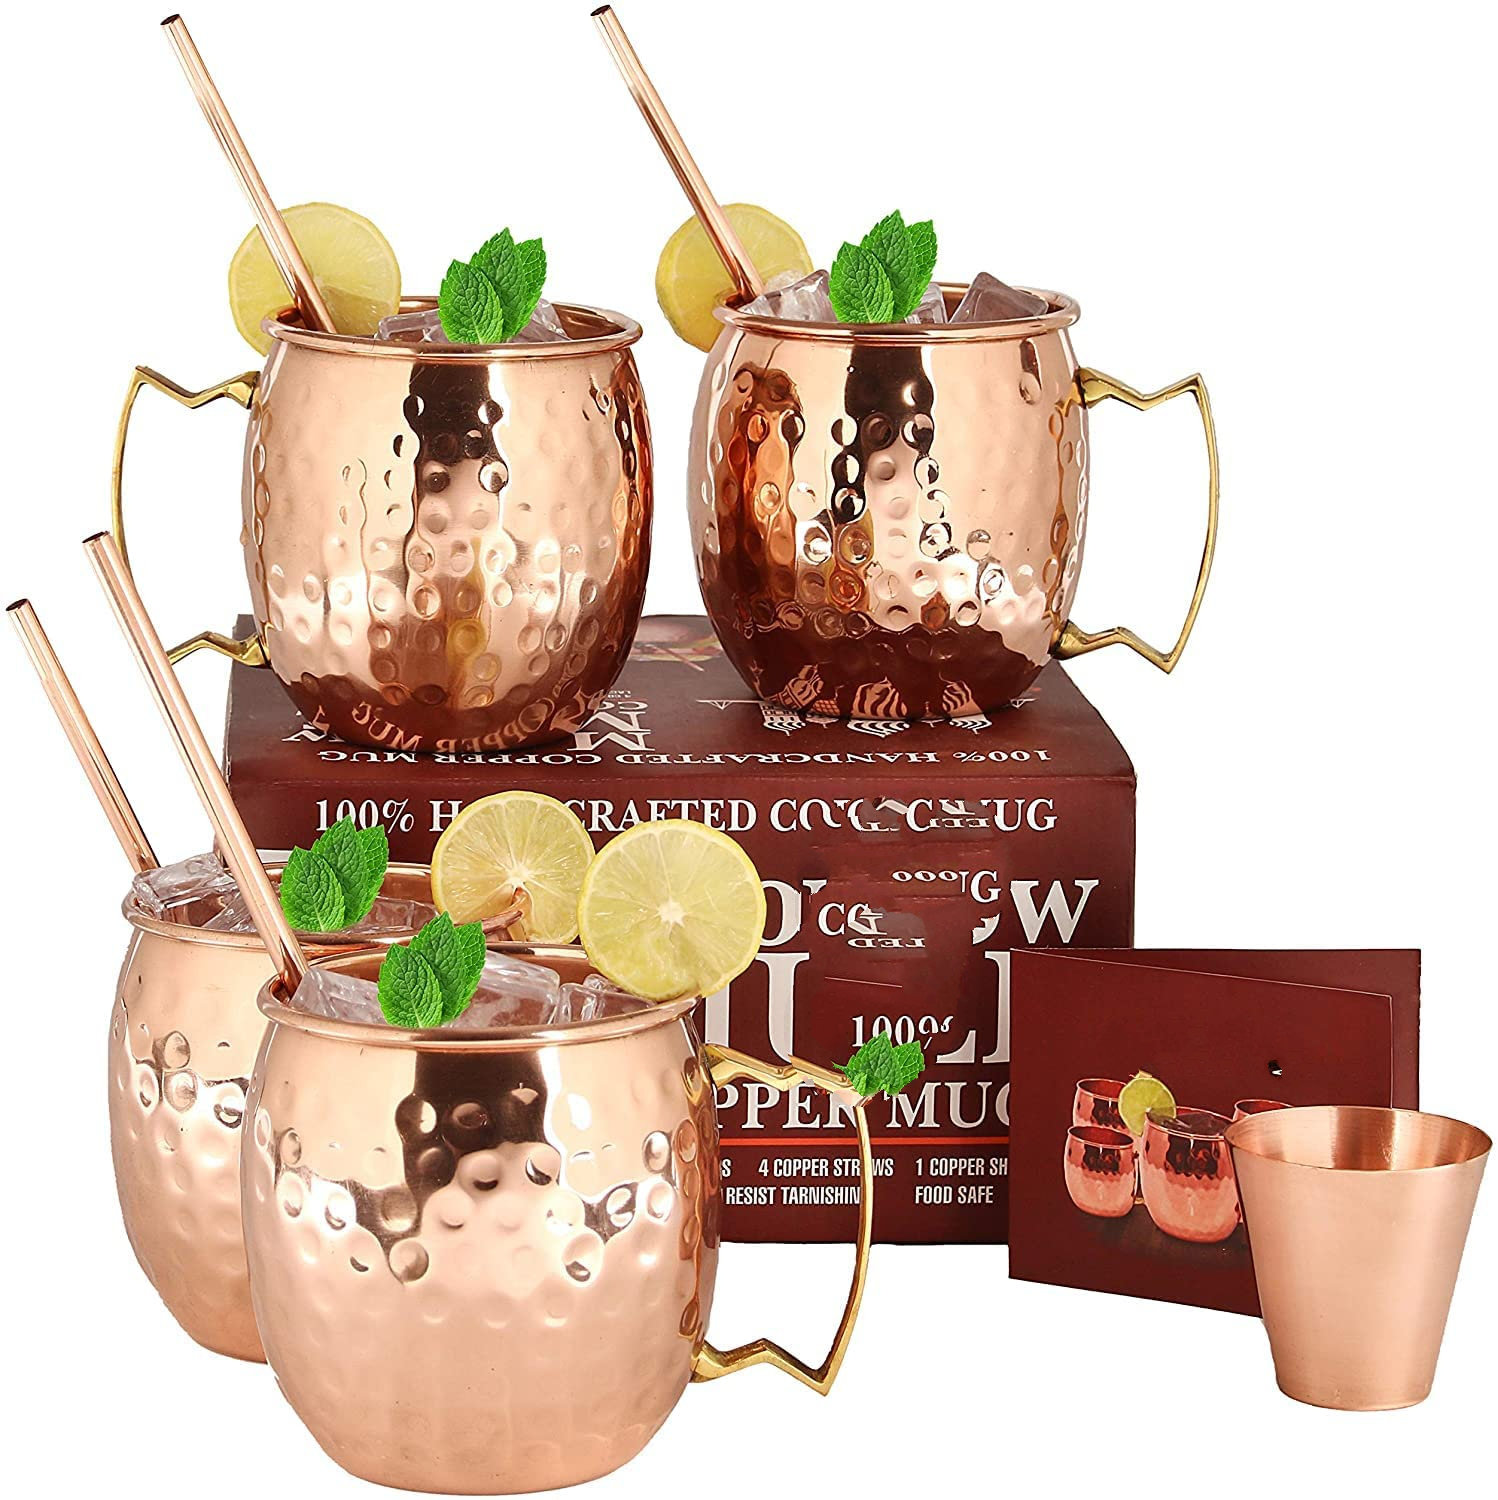 Authentic Moscow Mule Mugs 16 oz Barrel Solid Copper Moscow Mule Mug 100% Pure Copper 